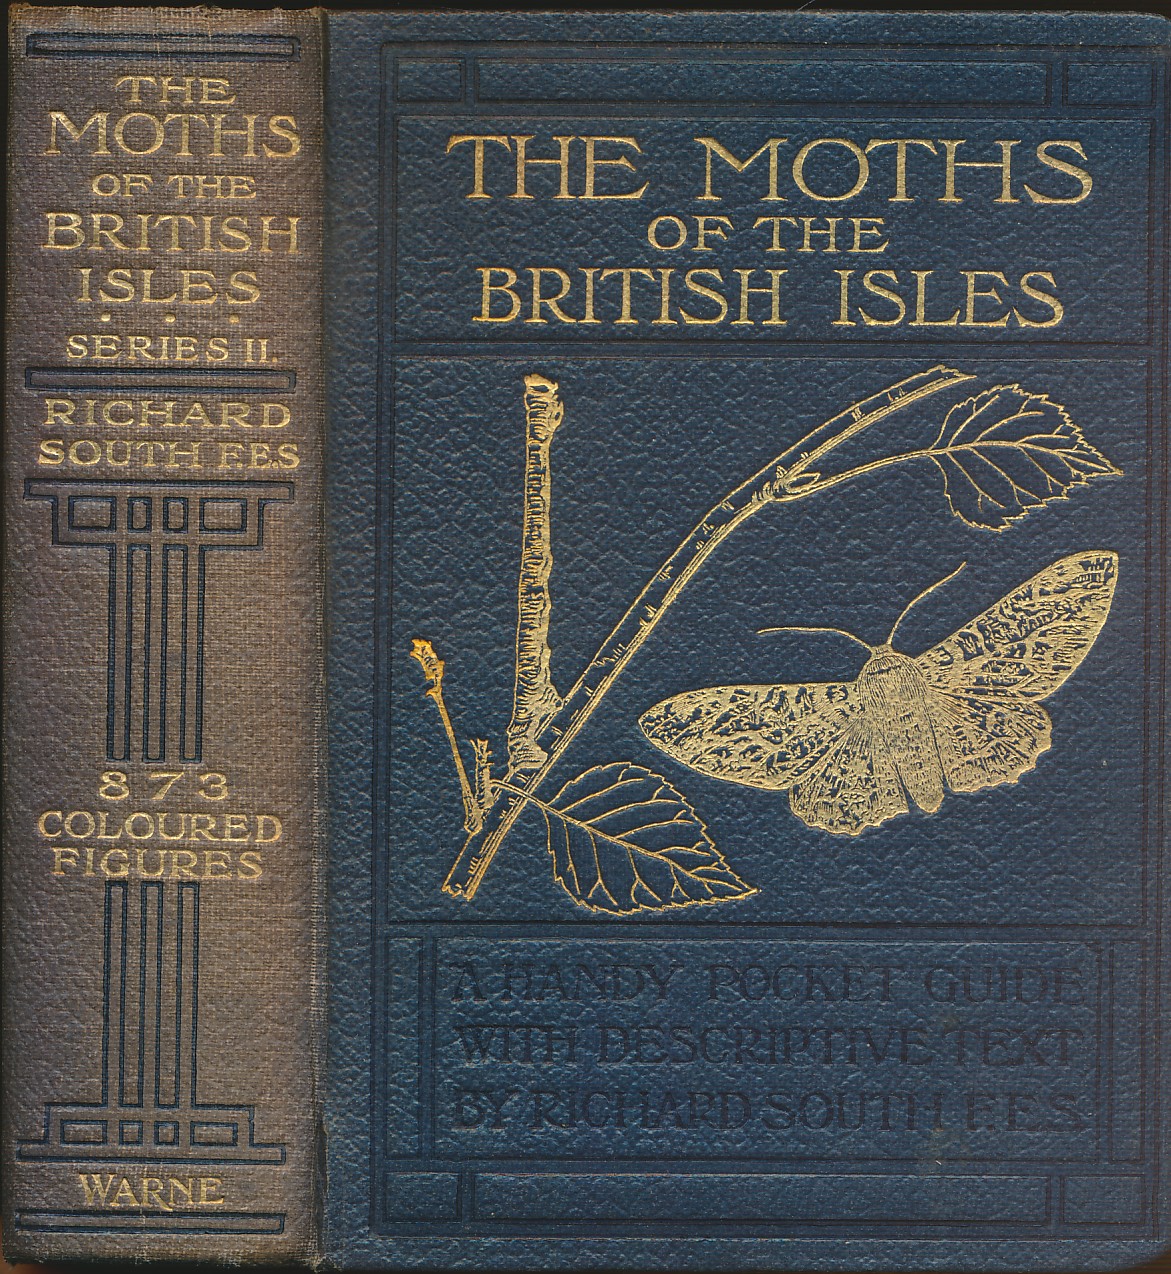 The Moths of the British Isles. The Wayside and Woodland Series. Second Series.